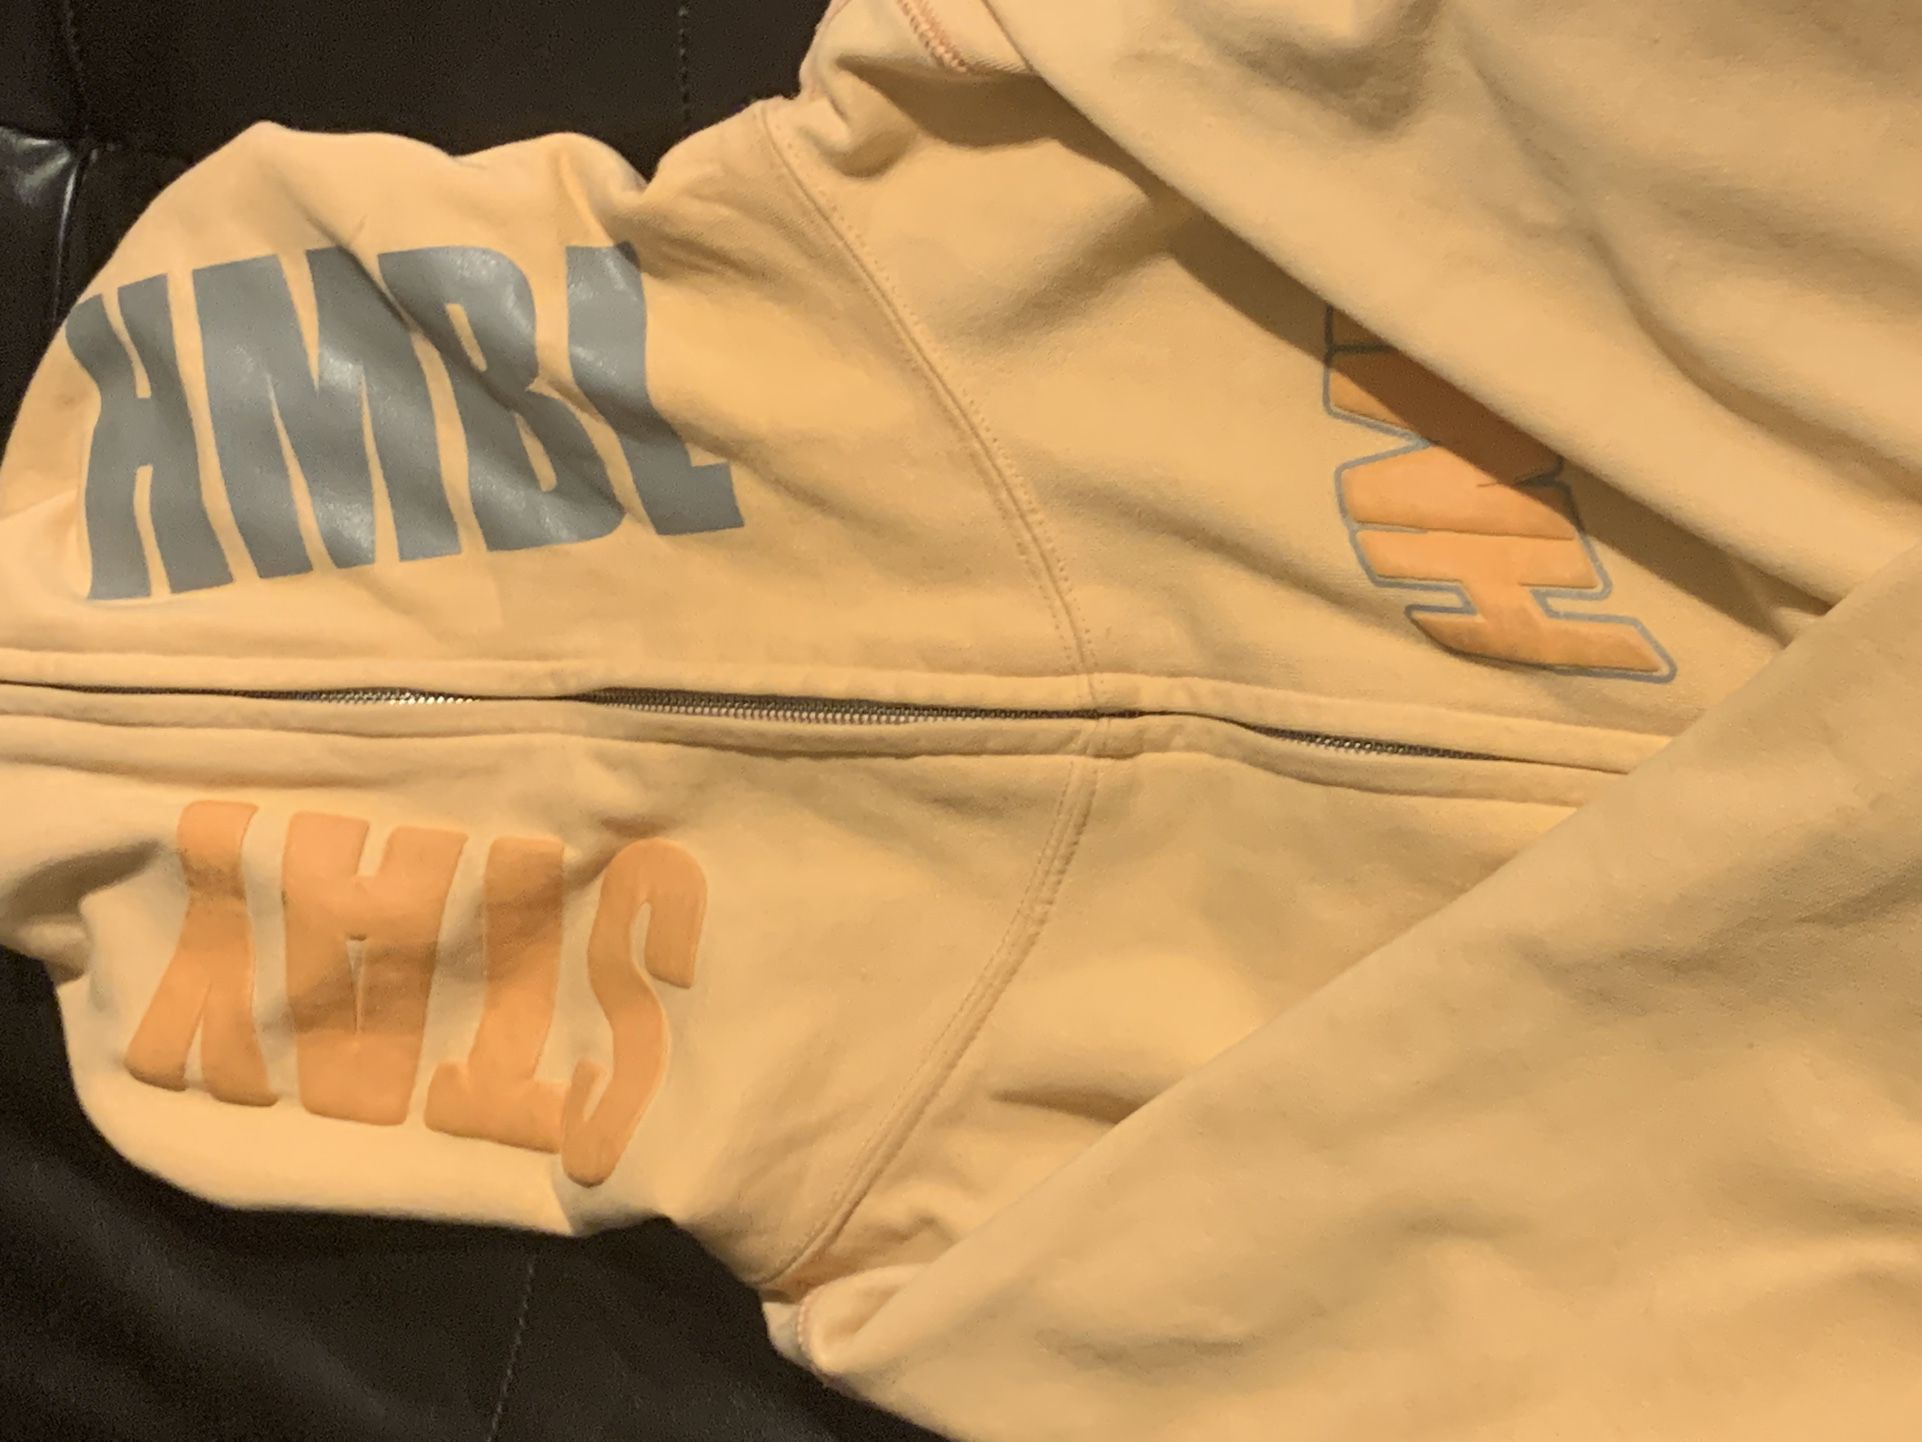 Stay Humble Hoodie - trading for a PlayStation 4